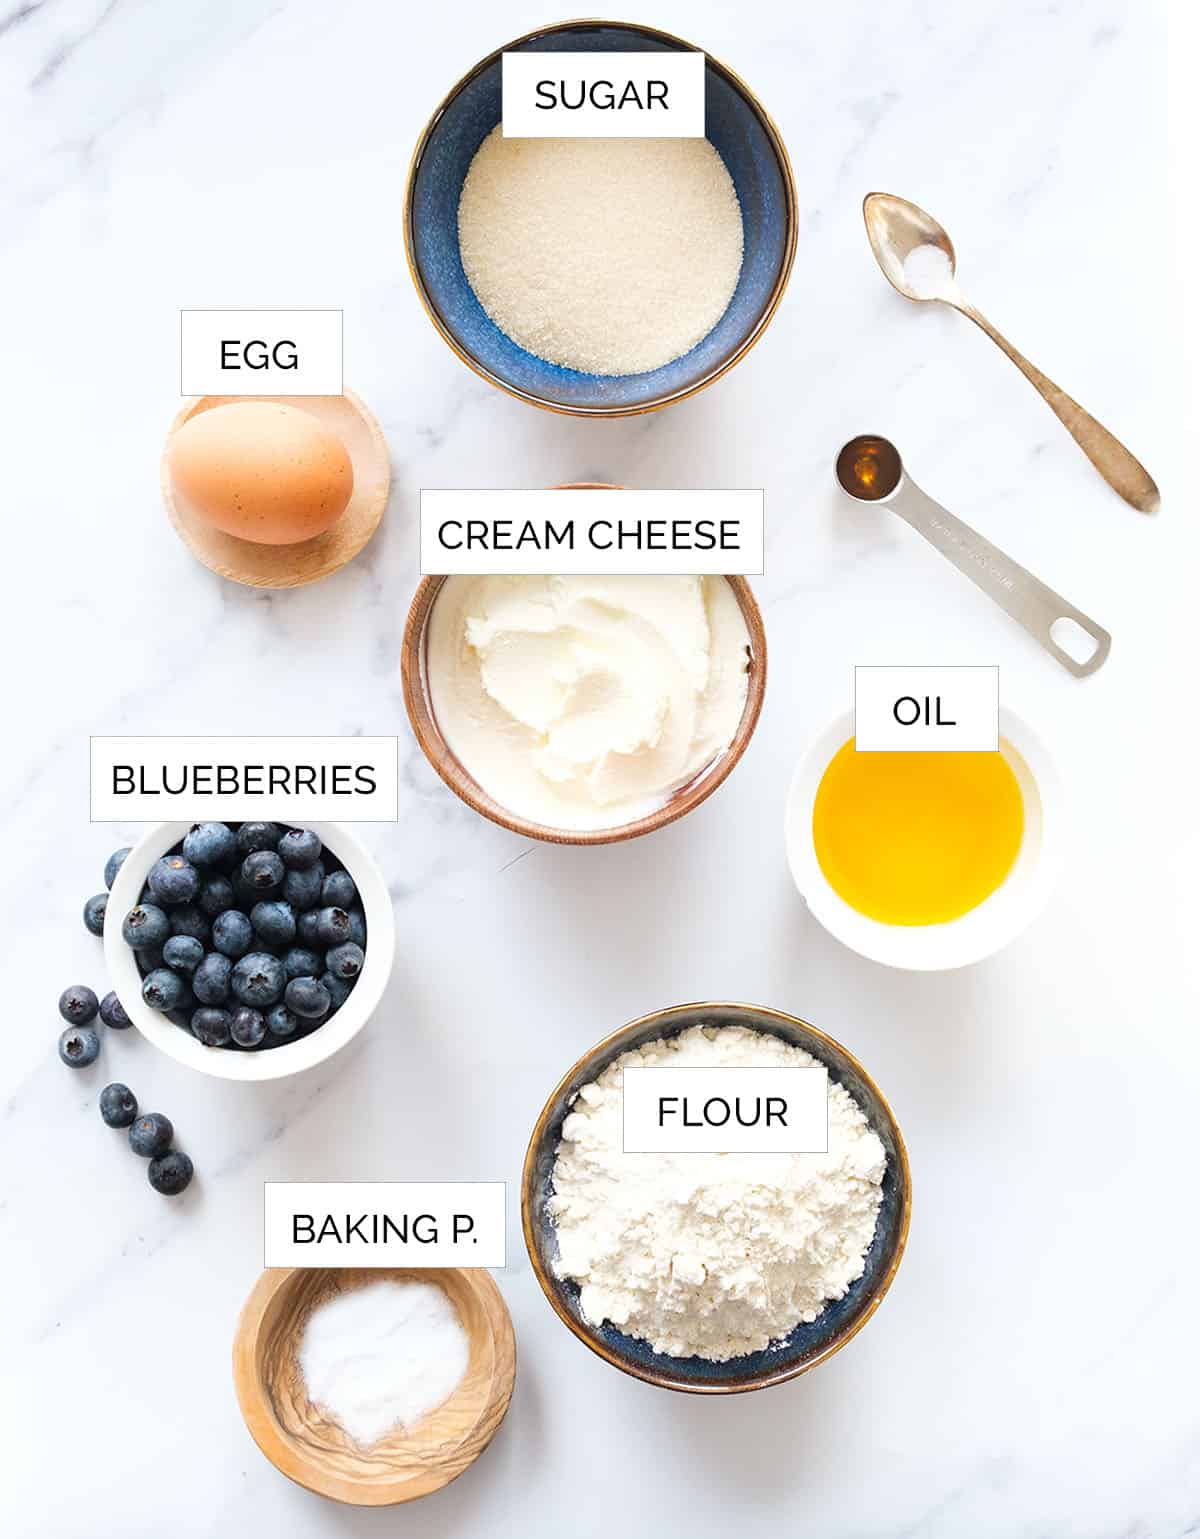 The ingredients to make these cream cheese blueberry are arranged over a white background.